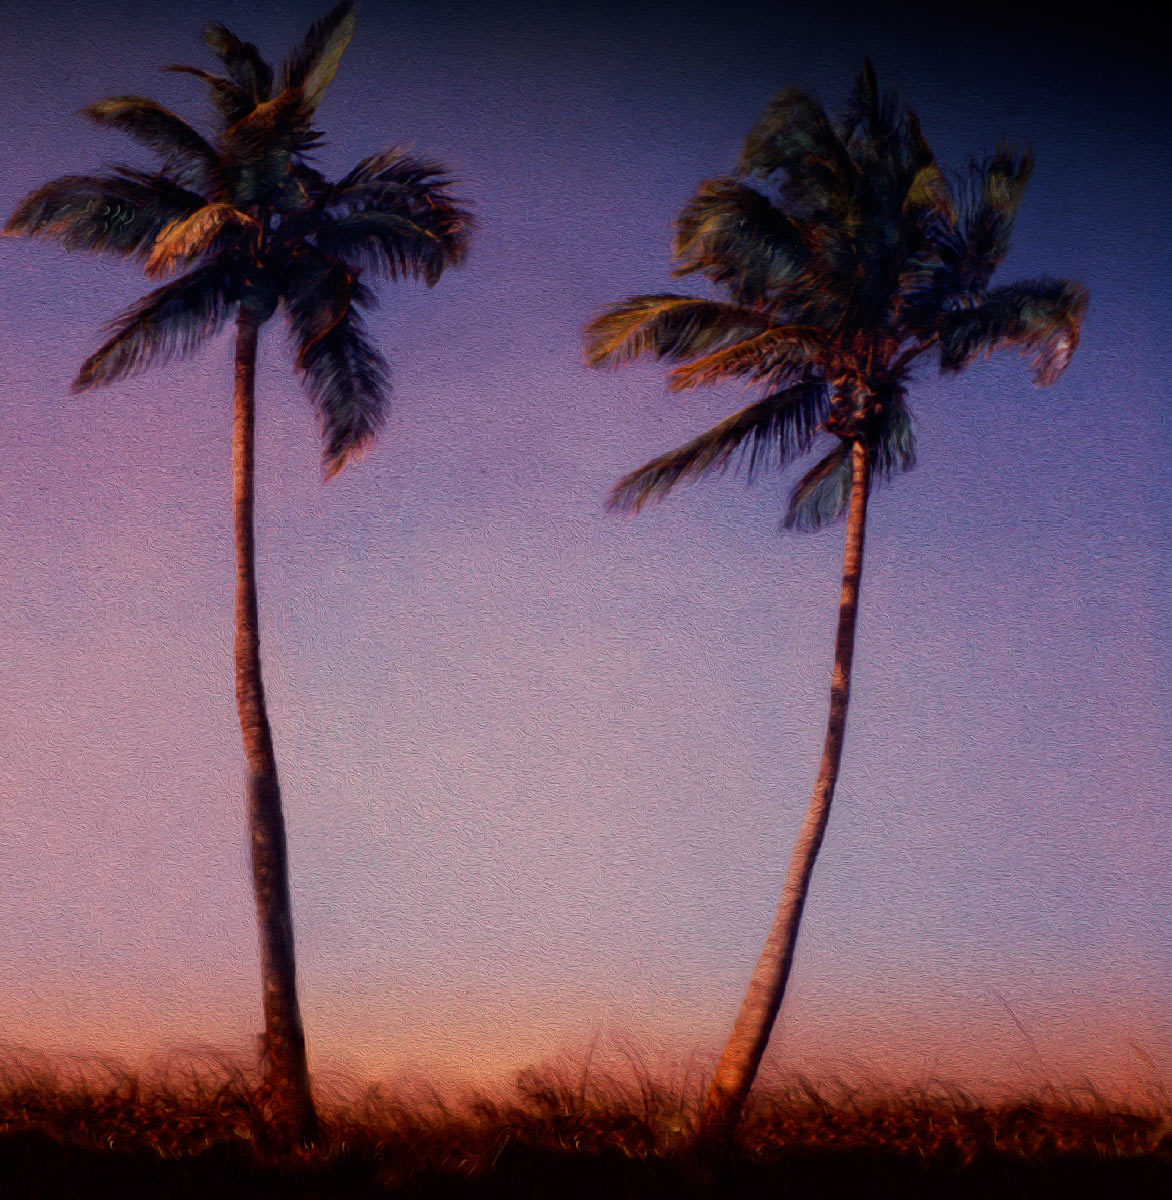 "Two Tall Palms and Weeds at Sunrise" <br>Hollywood Beach, FL